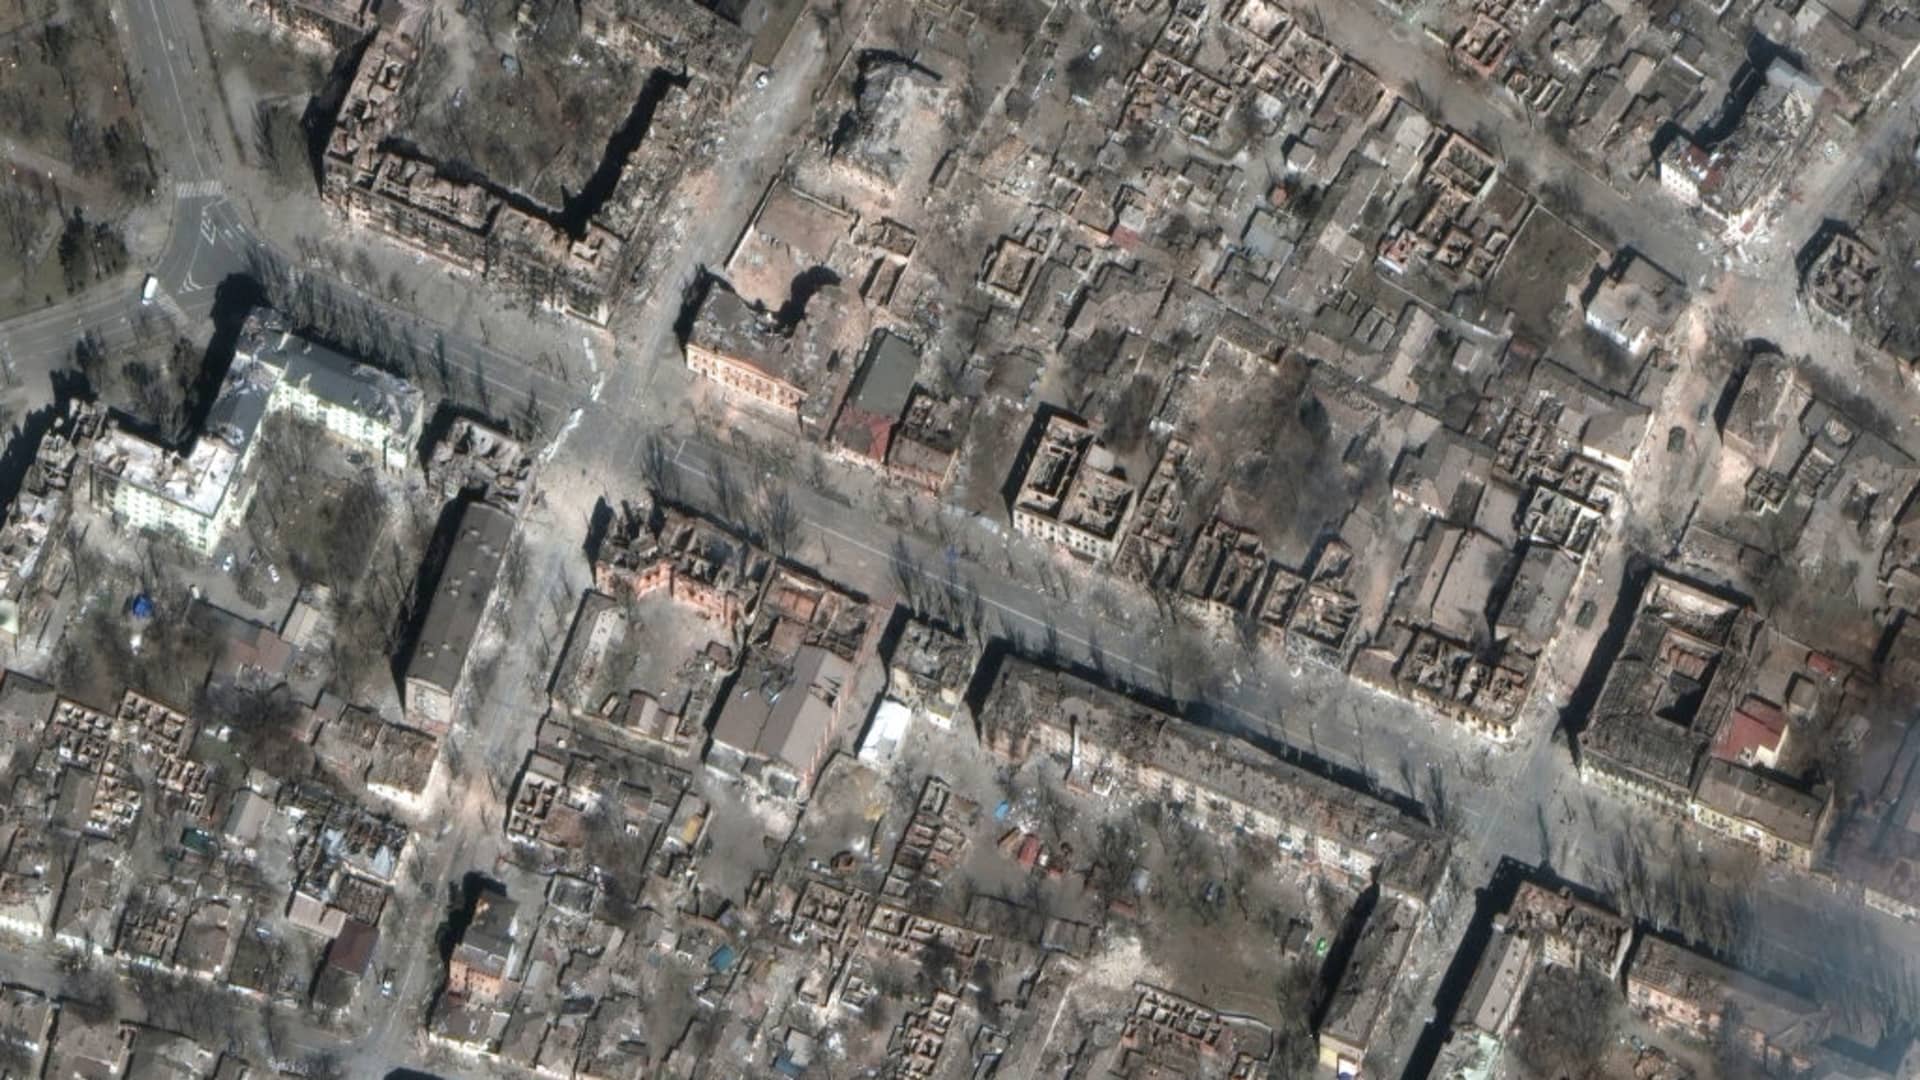 Maxar satellite imagery of destruction of homes and buildings after the invasion, Mariupol, Ukraine on March 29th, 2022.